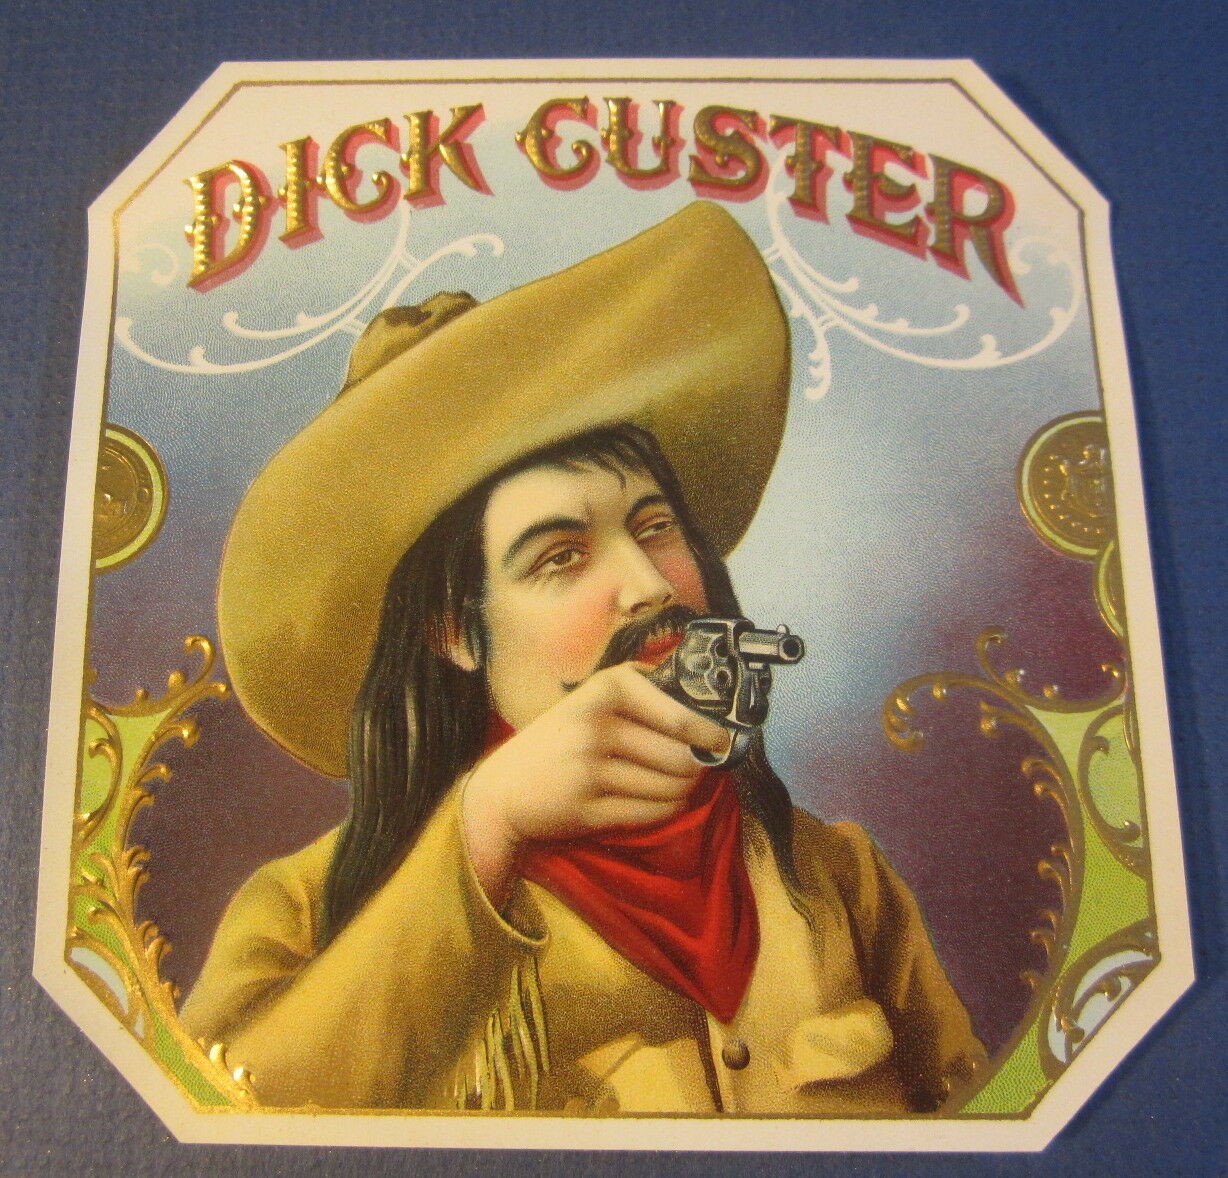  Old Antique - DICK CUSTER - Outer CIGAR LABEL ...